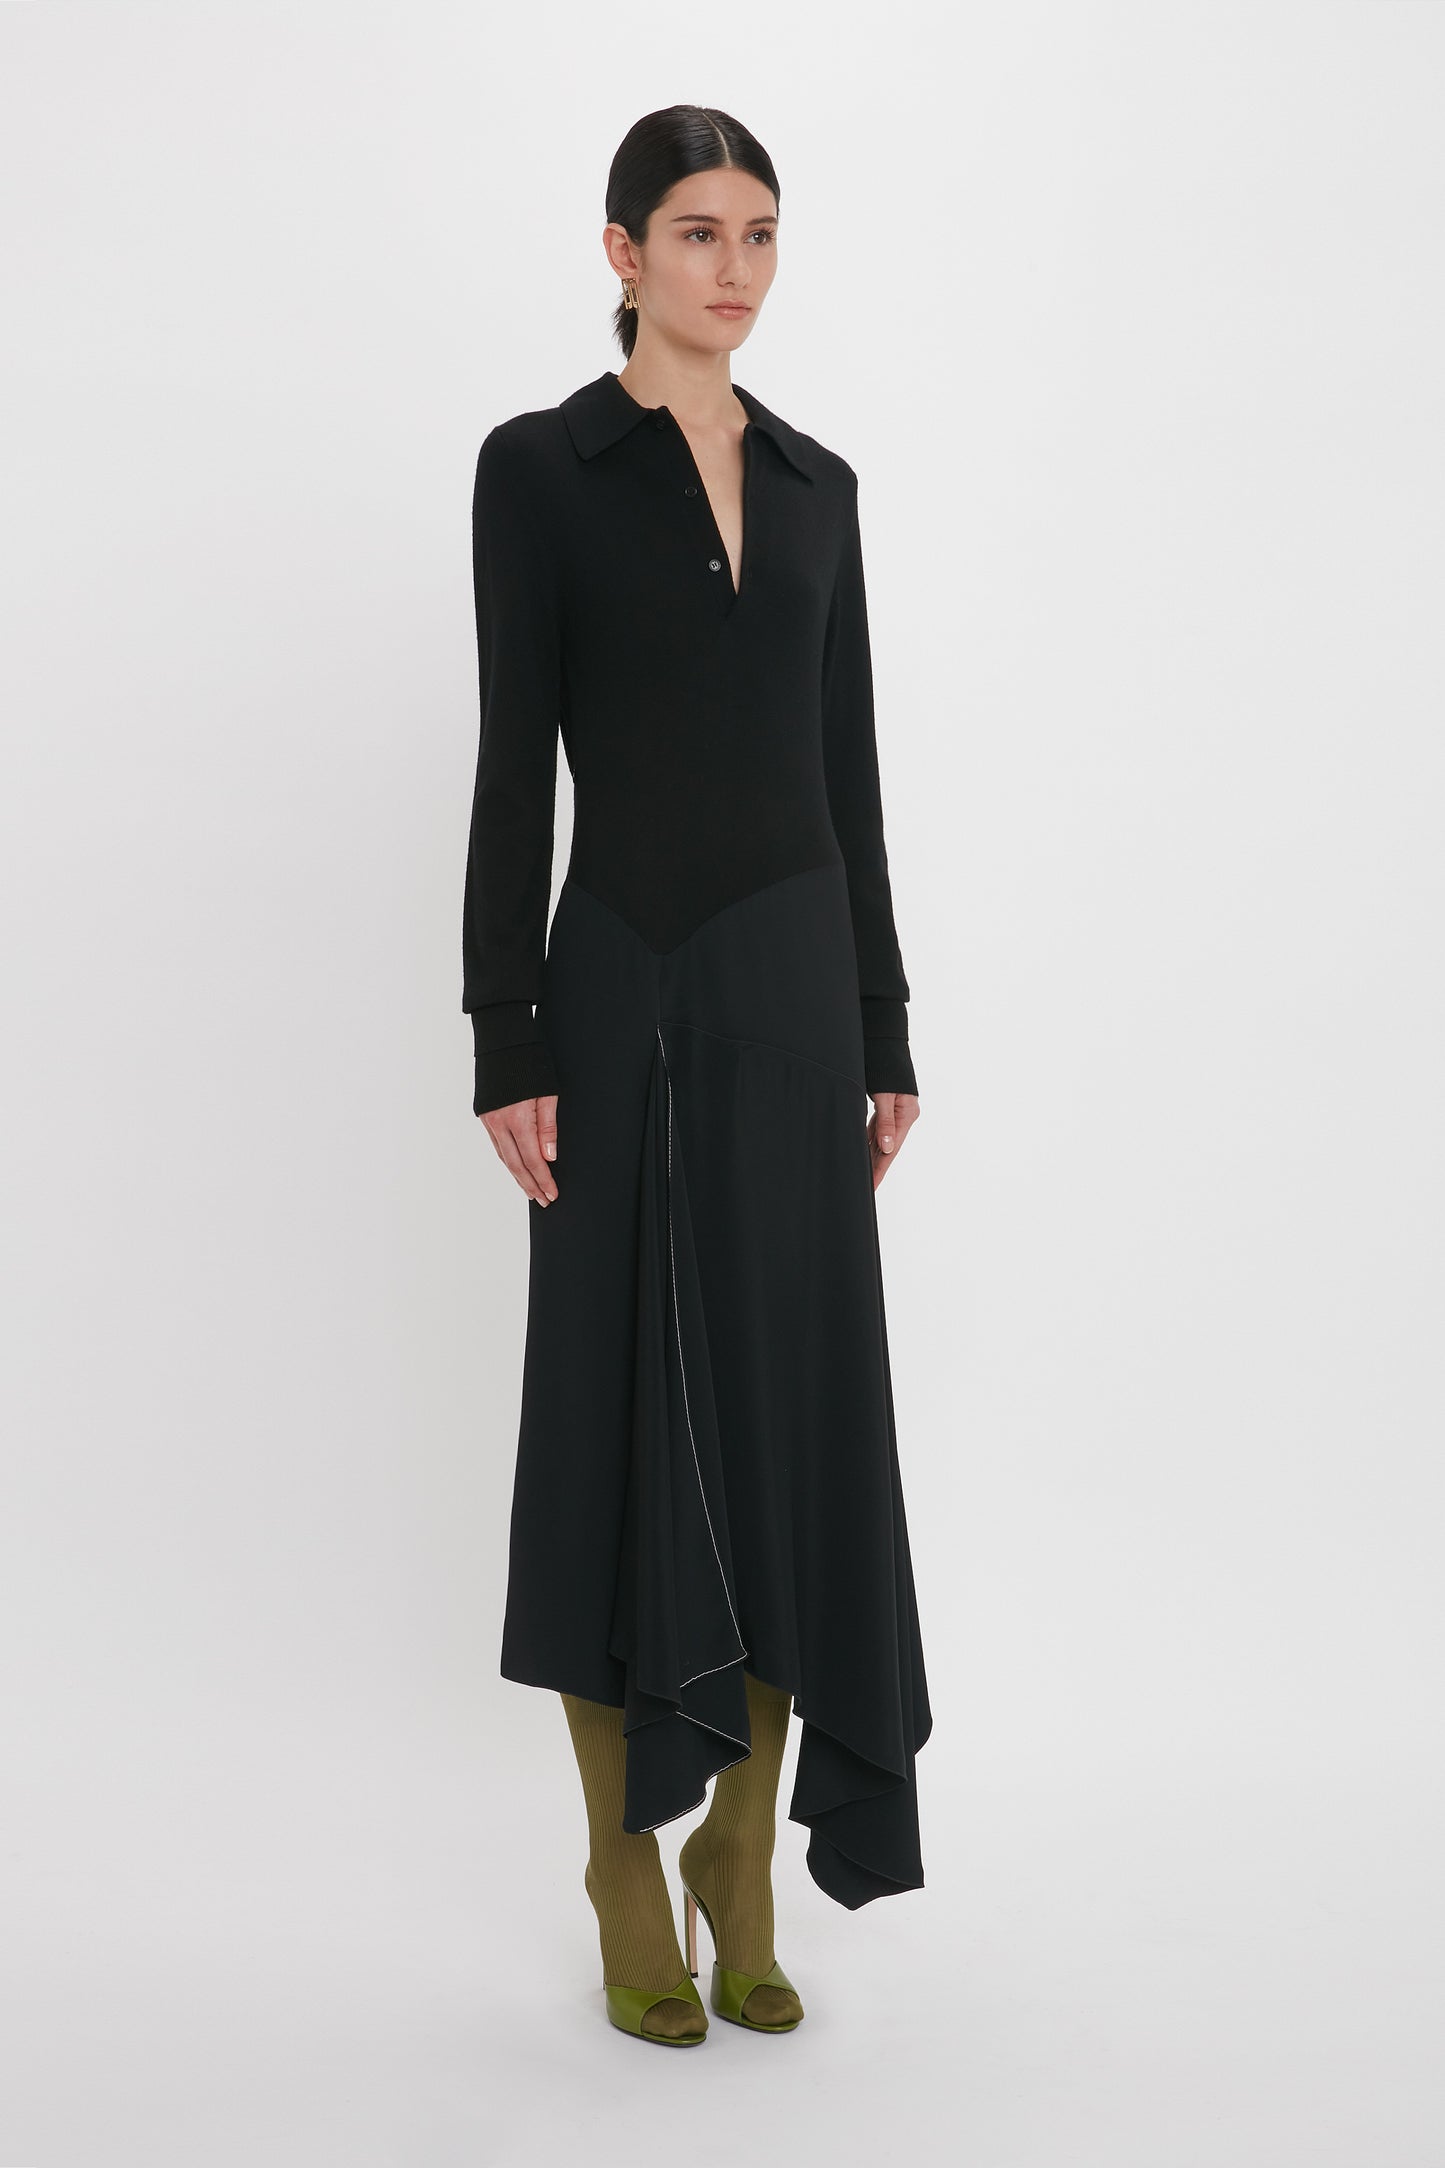 A person wearing a long black Henley Shirt Dress In Black by Victoria Beckham with a collar, long sleeves, and an asymmetric waist seam, paired with green knee-high boots, standing against a plain white background.